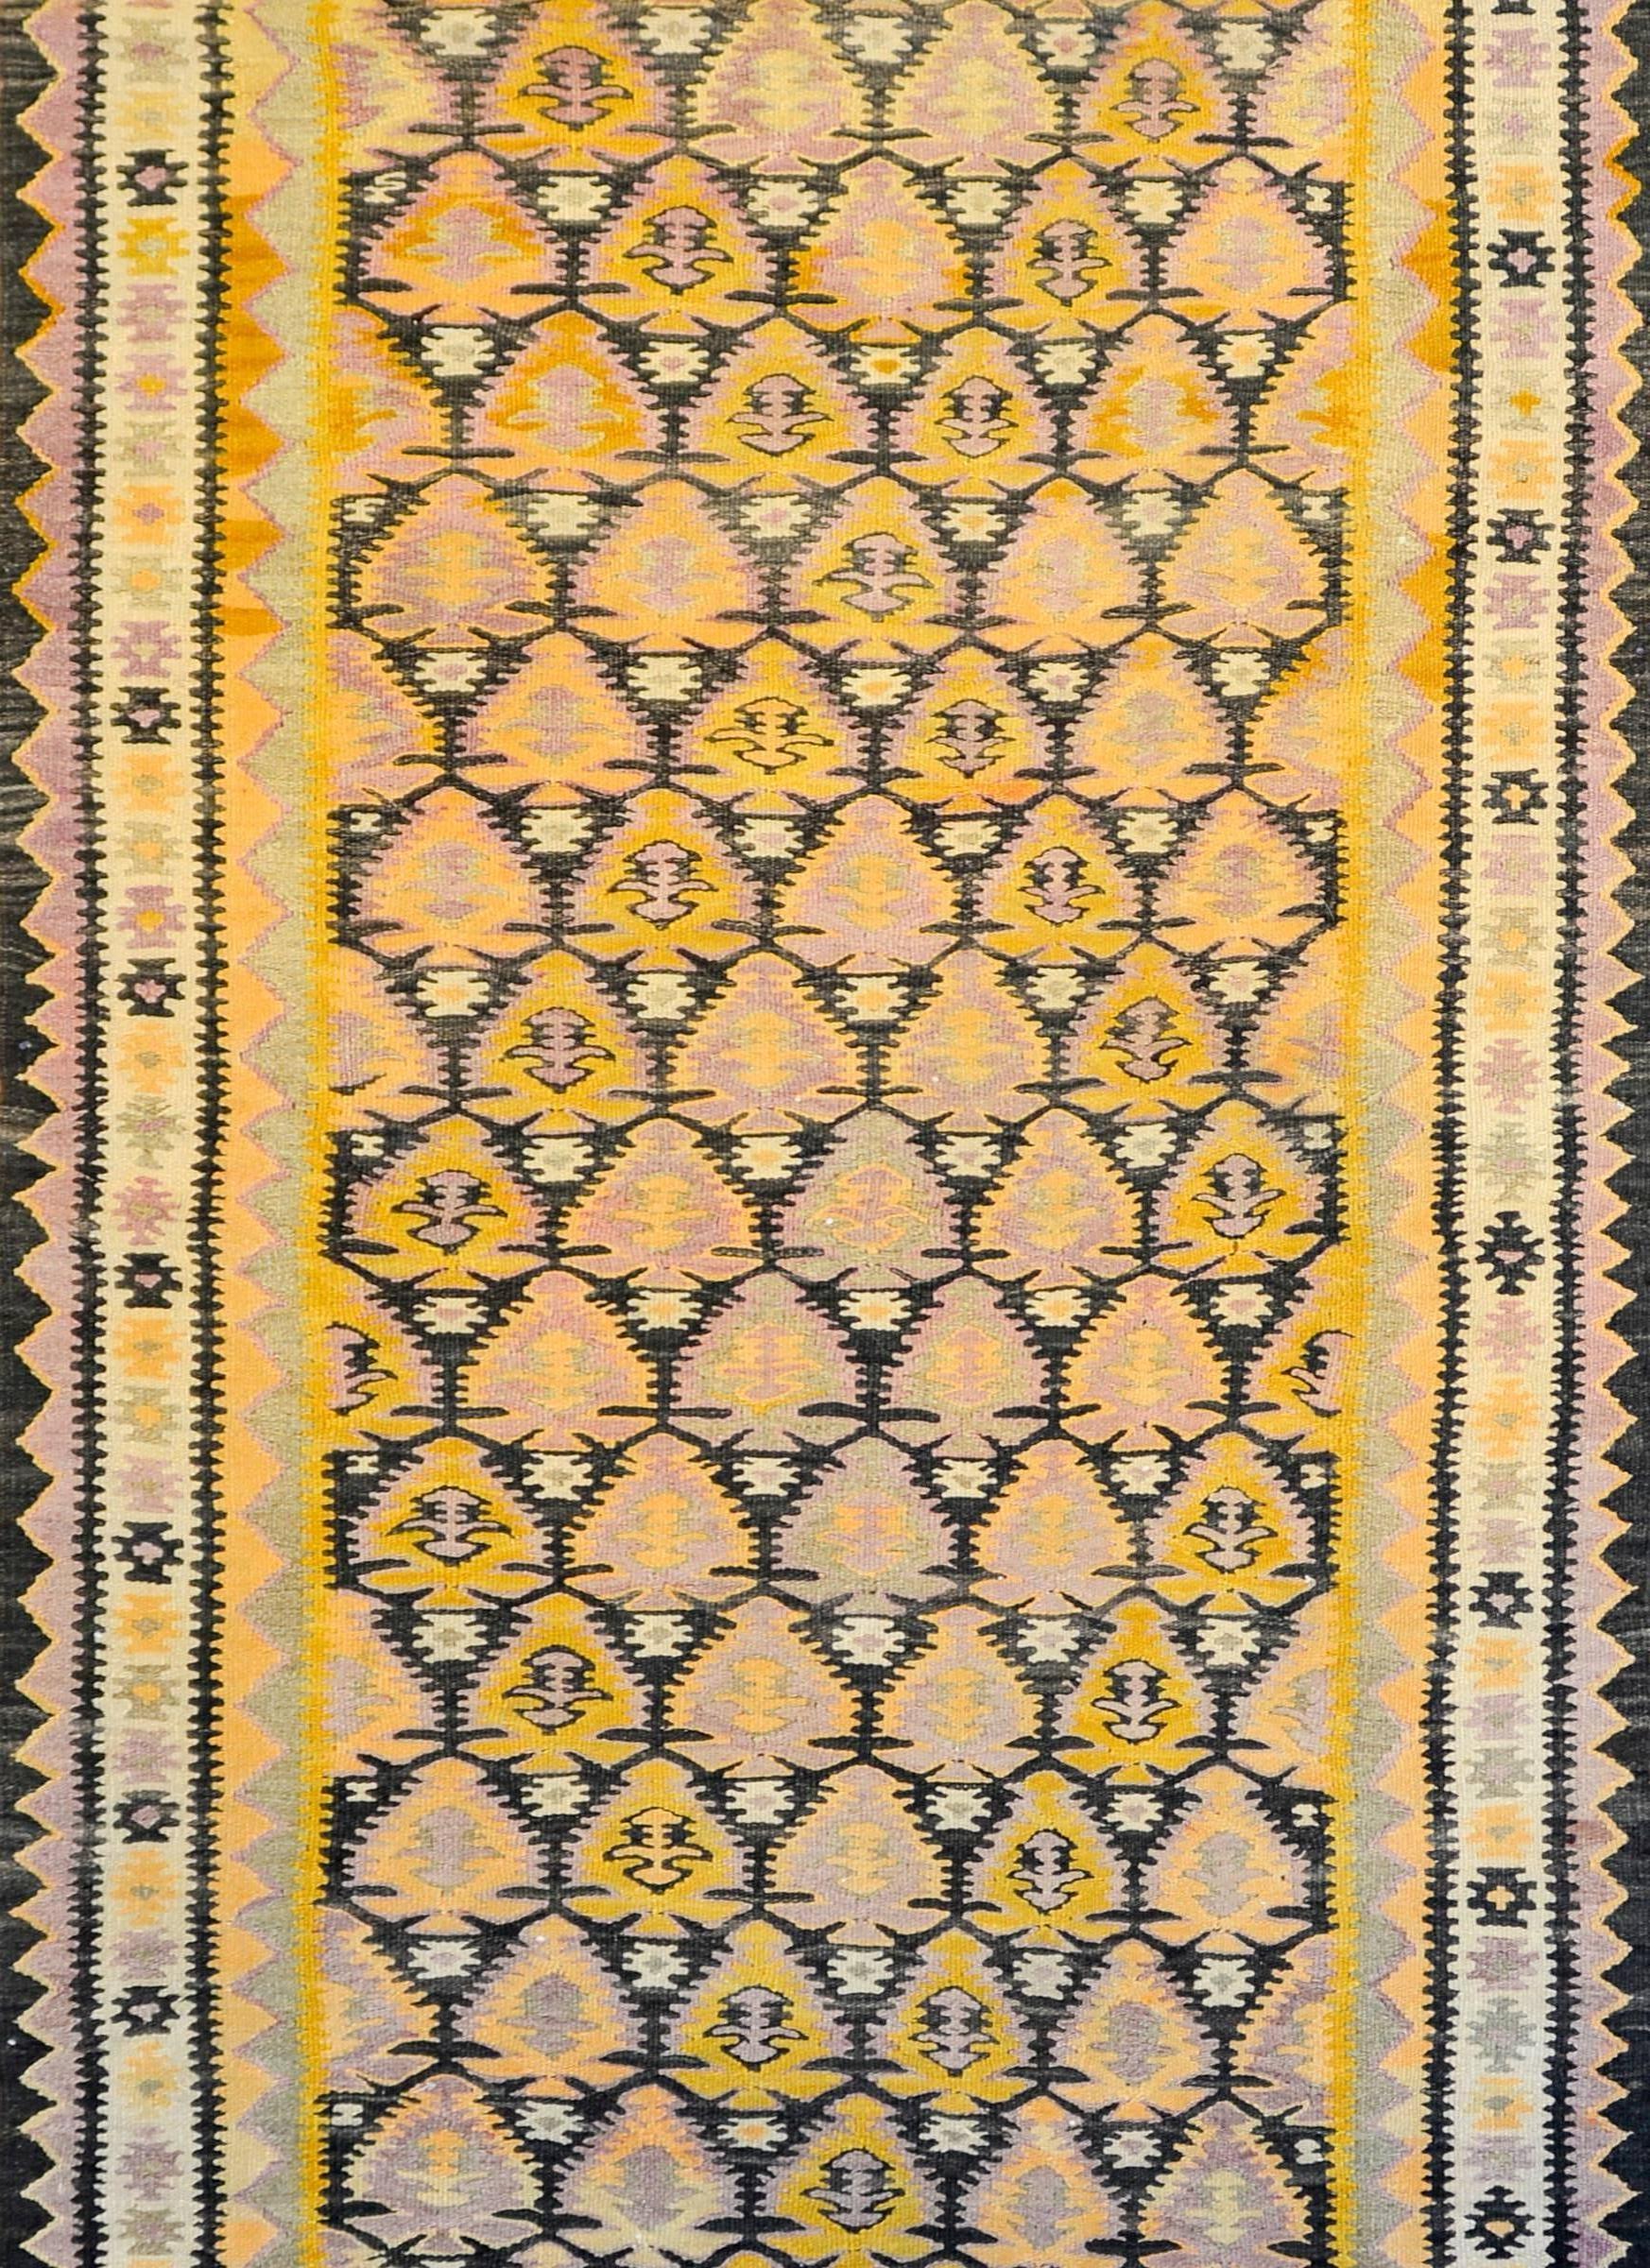 An amazing mid-20th century Persian Qazvin Kilim runner with an all-over tree-of-life pattern woven in a way that creates a diamond pattern of gold, lavender, black, and natural wool colored trees. The border is complex, with three distinct floral